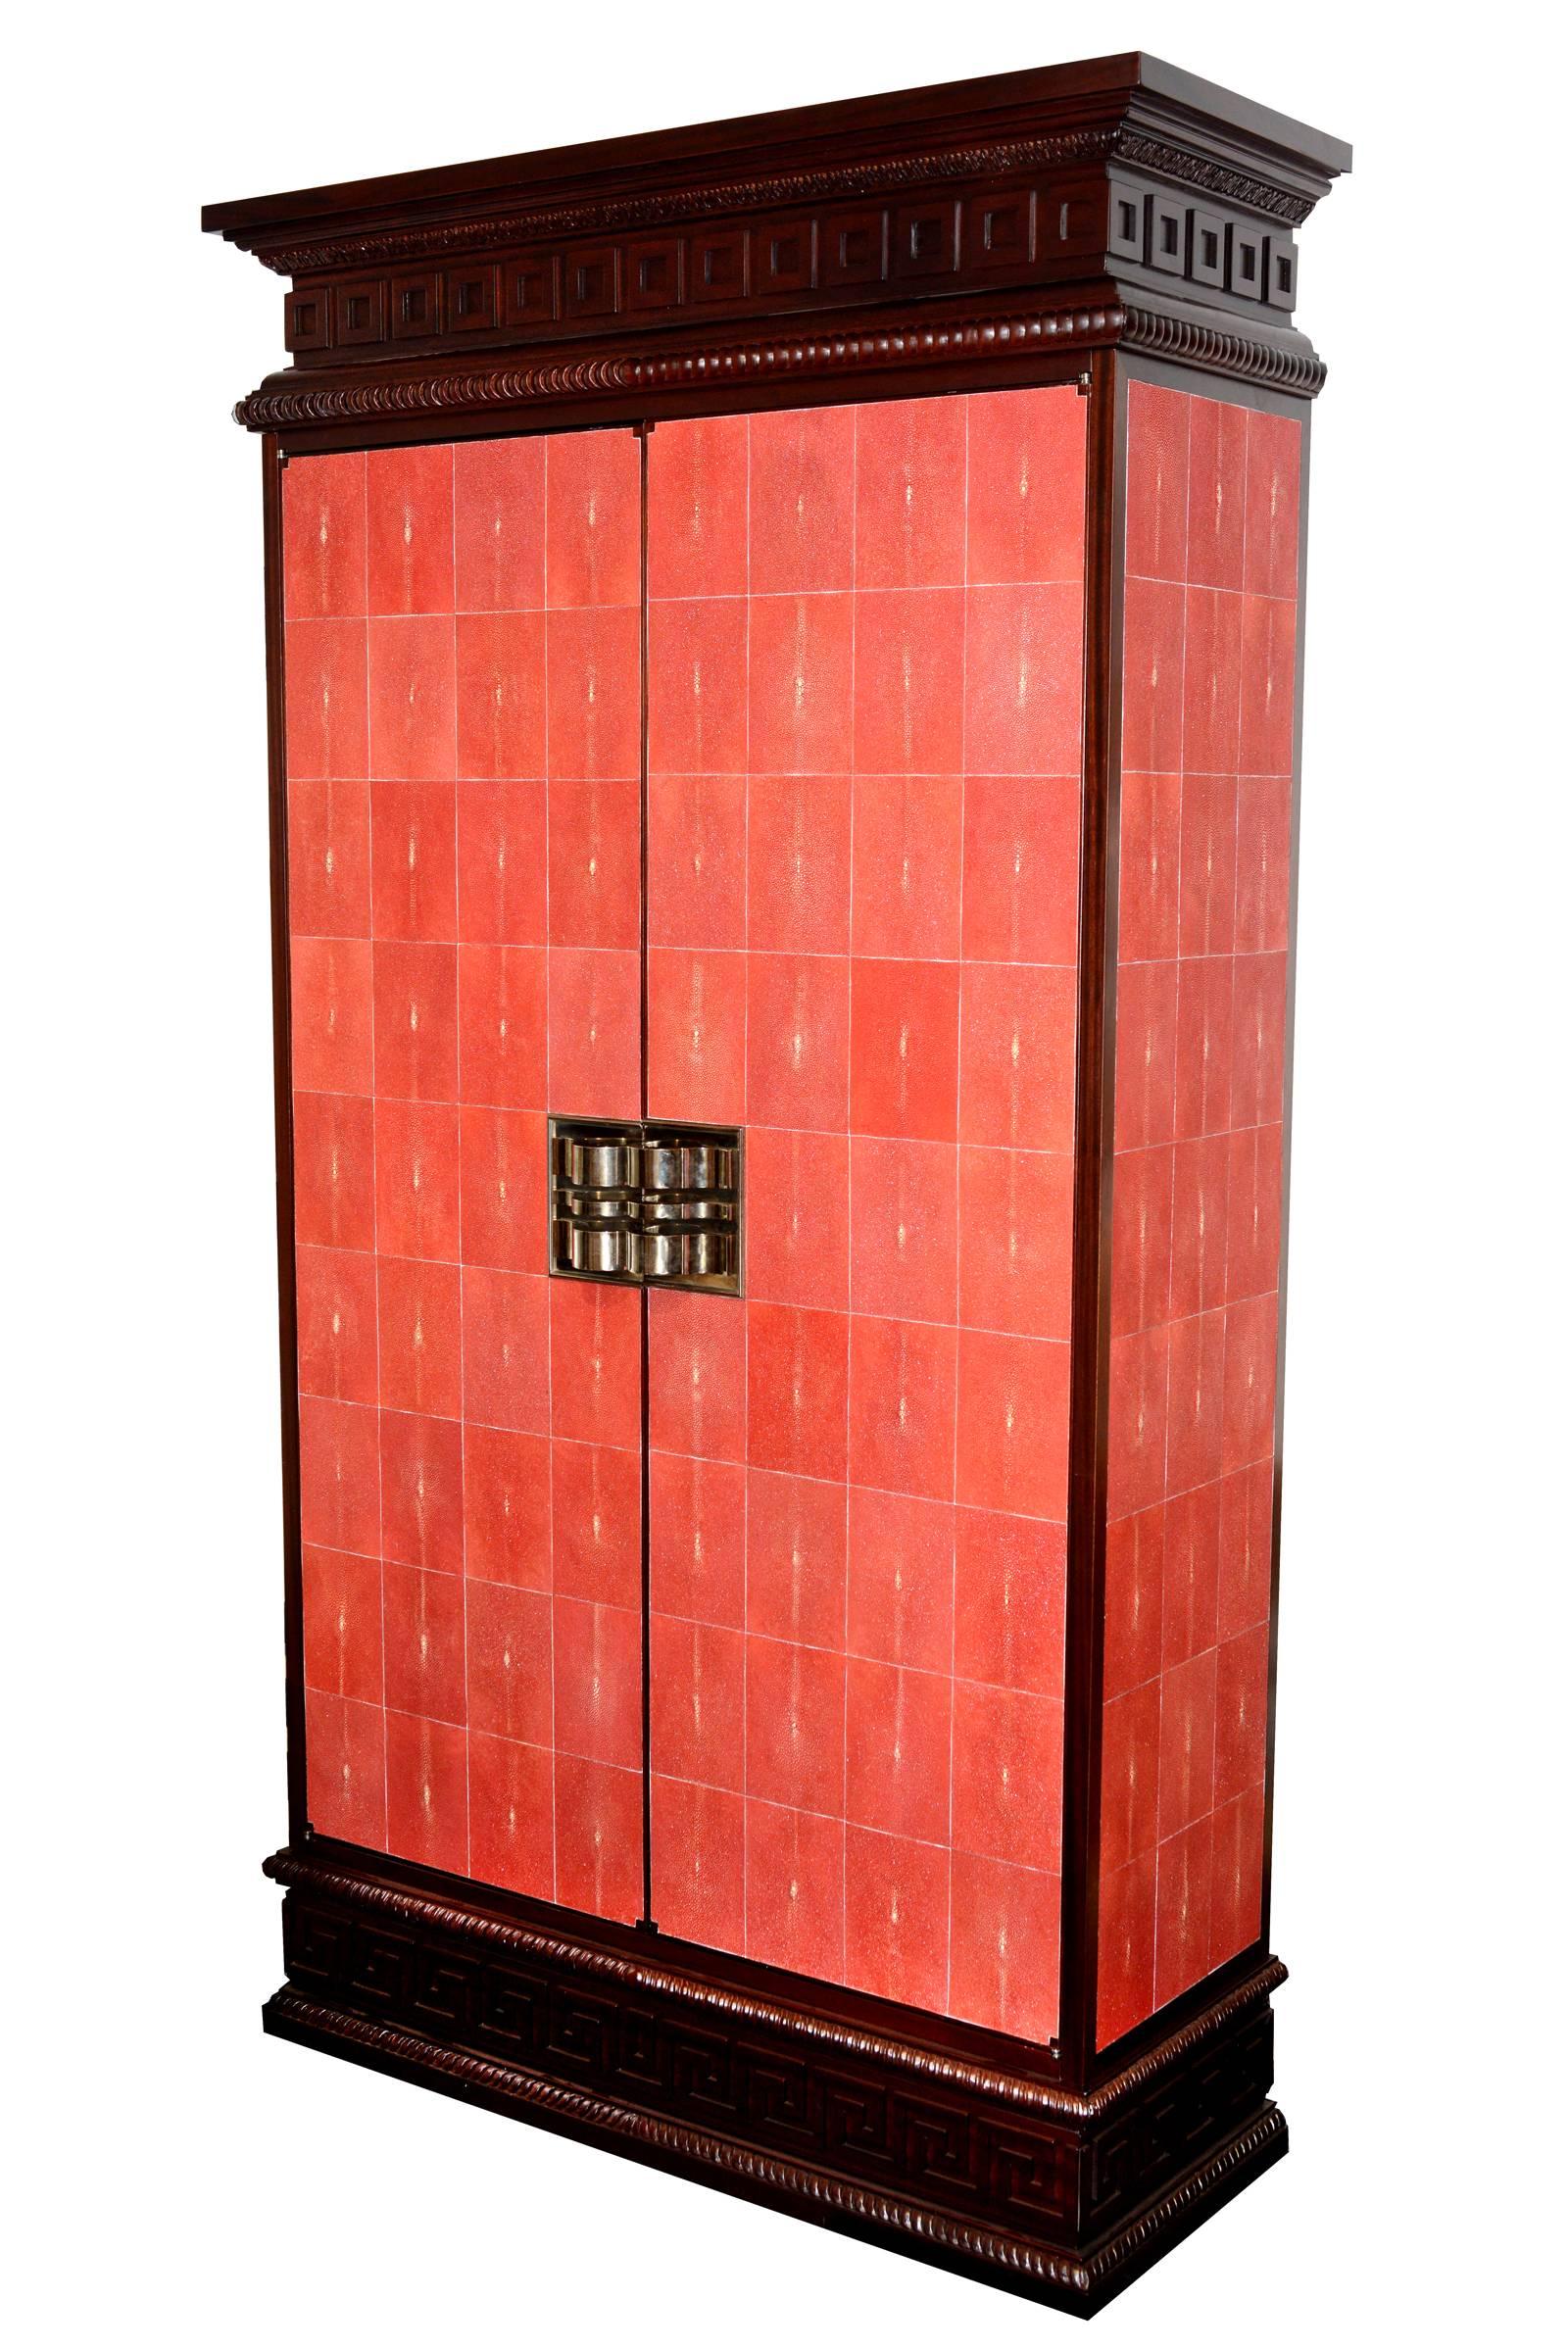 Cabinet Galuchat rouge set of two in solid mahogany and red
genuine sharkskin, double handles nickel-plated copper,
with interior shelves with central cushion in fabric and 
interior lights. Exceptional piece.
Set of two cabinets available. Unit